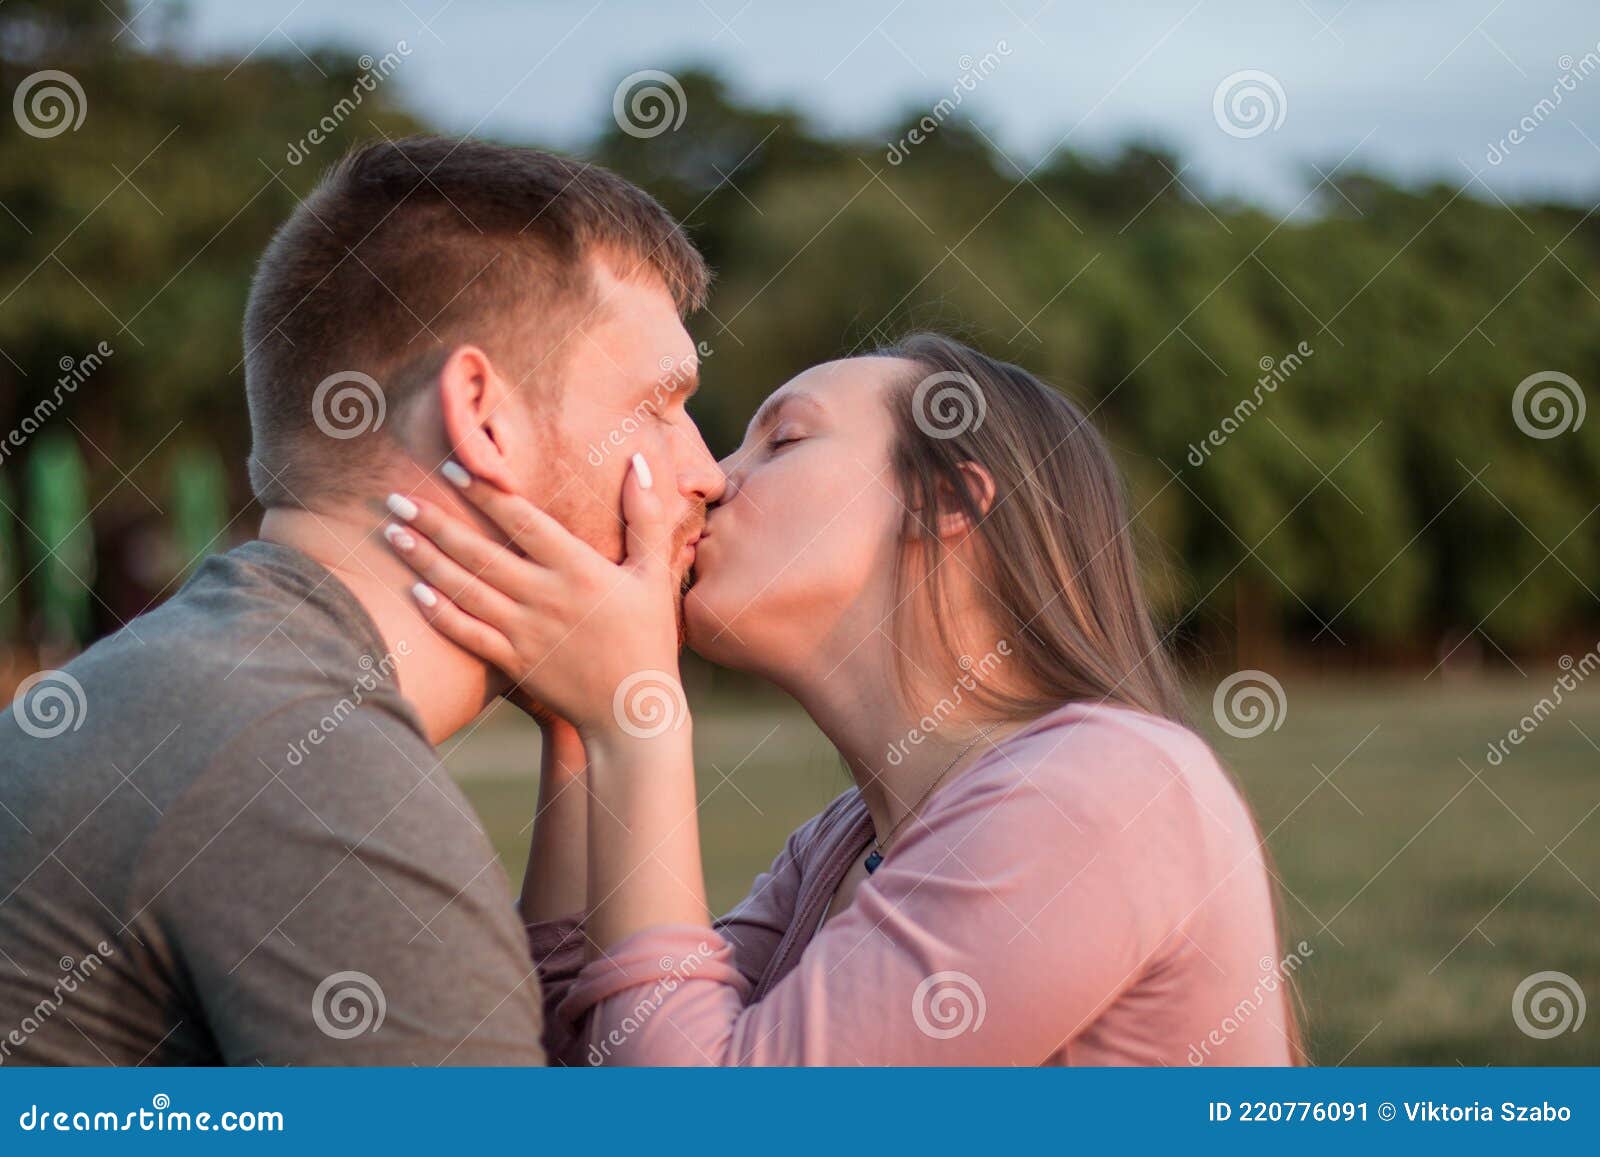 Young Couple in Love Sharing a Kiss at the Beach Stock Image photo